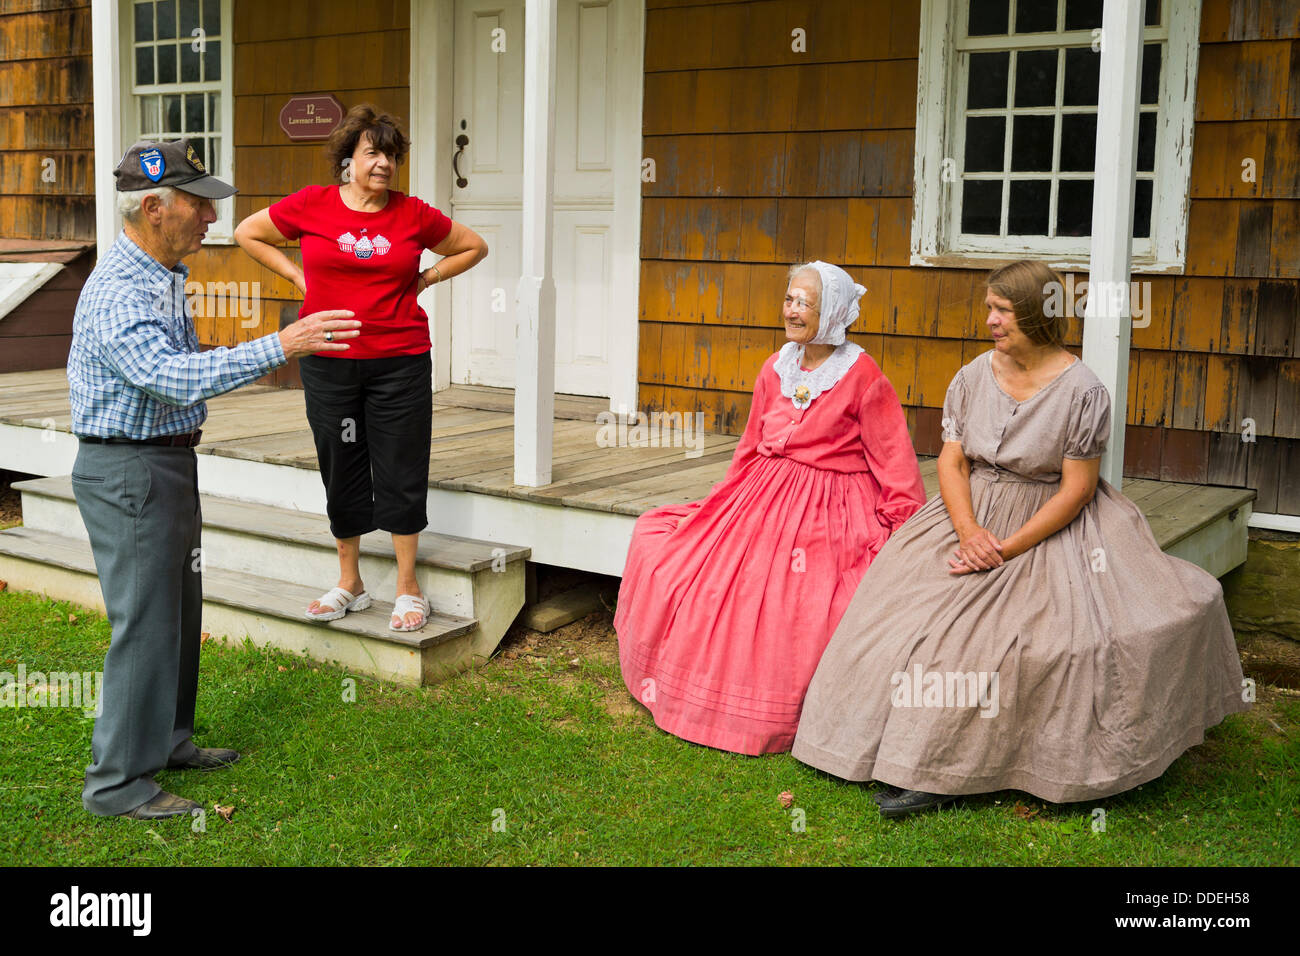 Old Bethpage, New York, U.S. 31st August 2013. PATRICIA JOSEPH, of College Point, in red dress, and JANE HEILIG, of Bethpage, in taupe dress, are talking with a man and woman visiting during the Olde Time Music Weekend at Old Bethpage Village Restoration, where 1800's popular music and dances of the American Civil War period is performed. Joseph & Heilig, wearing American Civil War era style clothing and sitting on the porch of 12 Lawrence House, are members of the Old Bethpage Village Dancers. Stock Photo